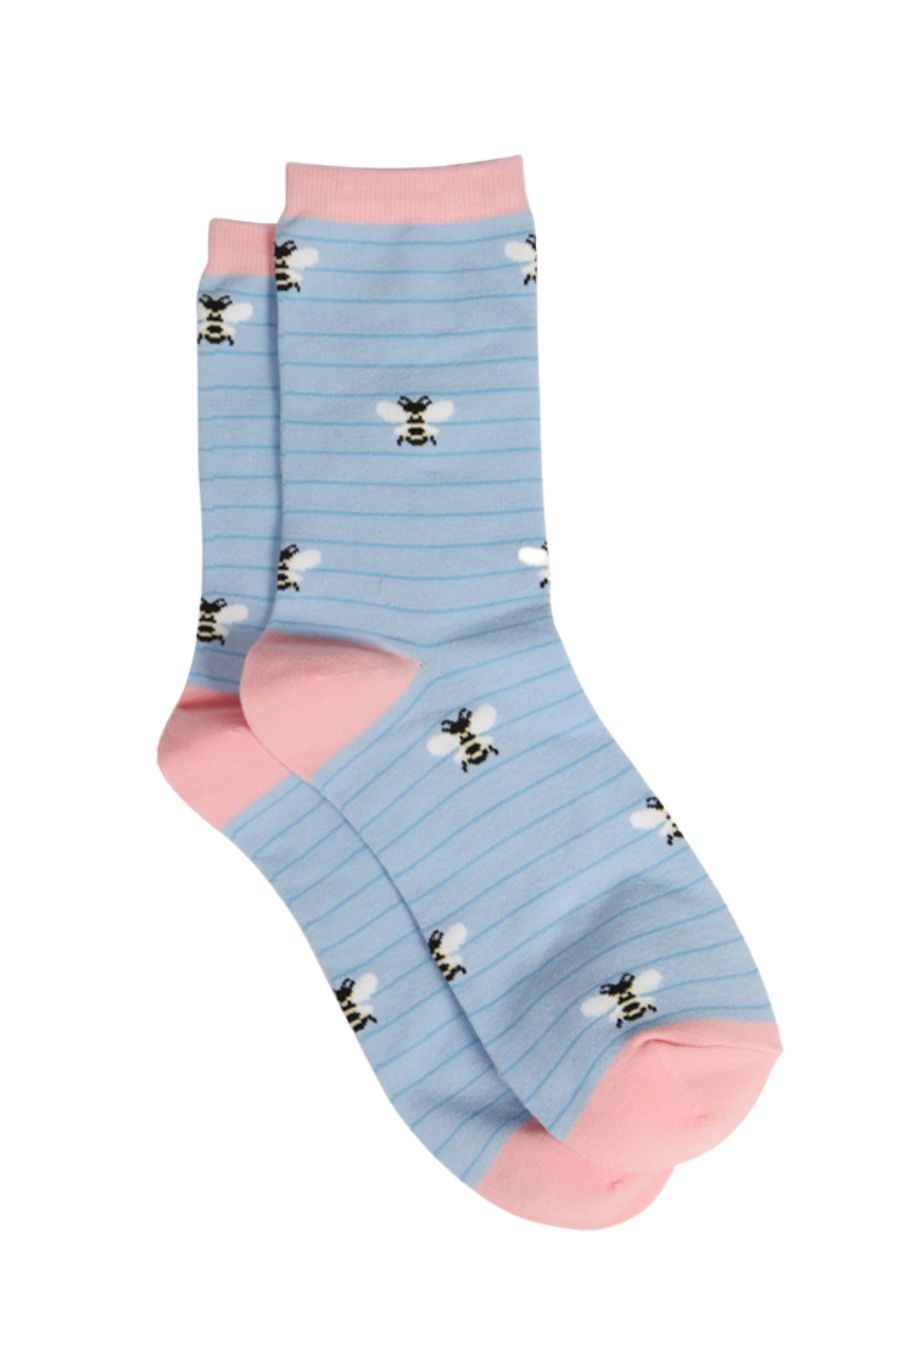 light blue pin striped socks with an all over bee print